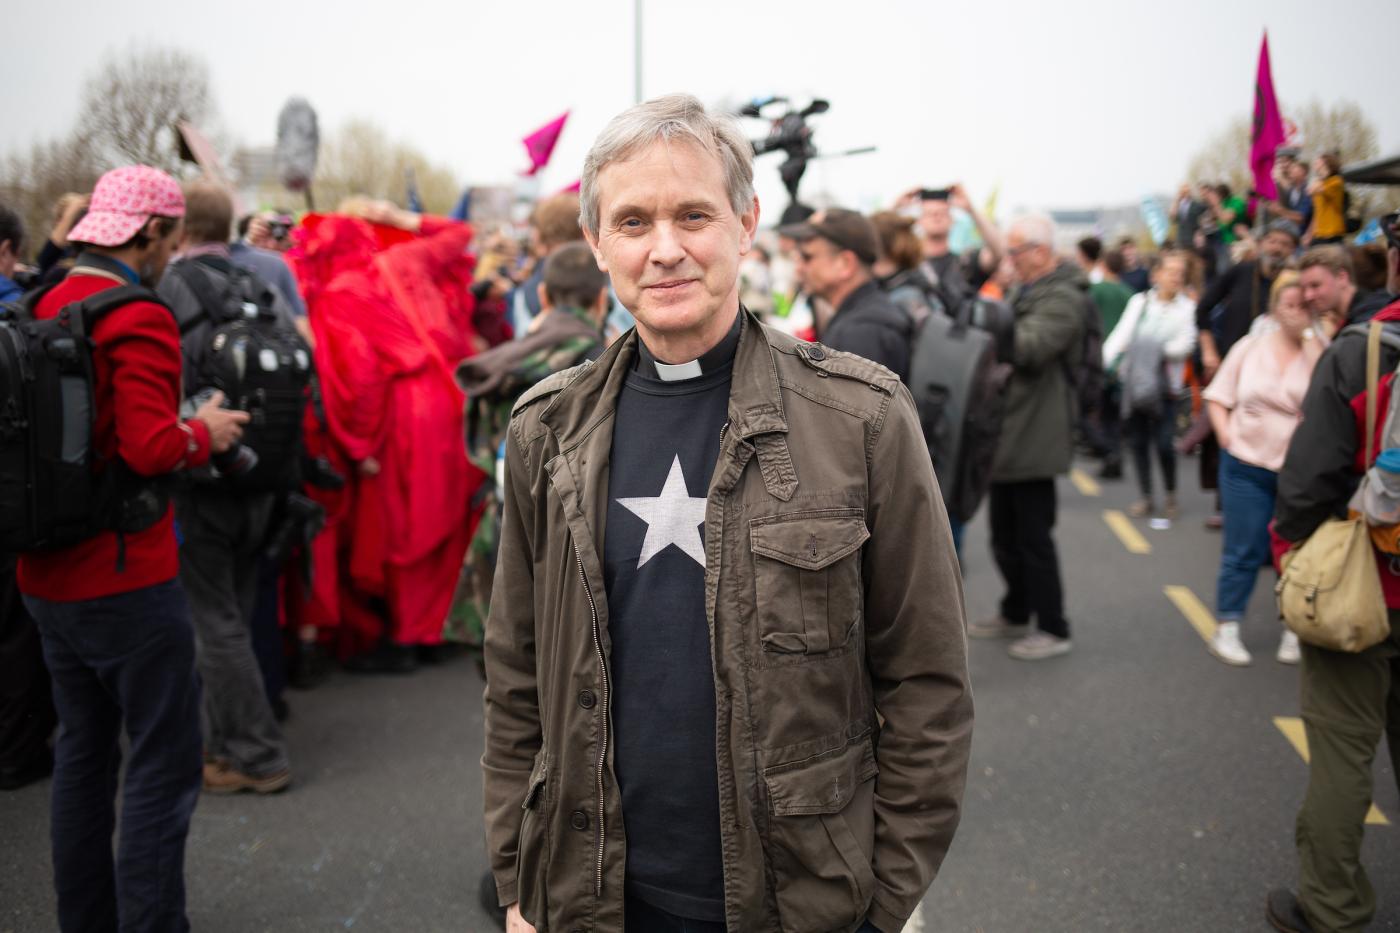 Giles Goddard, the vicar of St John's, Waterloo, where he is helping protestors in the Extinction Rebellion action by opening the church for the protestors to sleep and use other facilities. Photo: Sean Hawkey/WCC